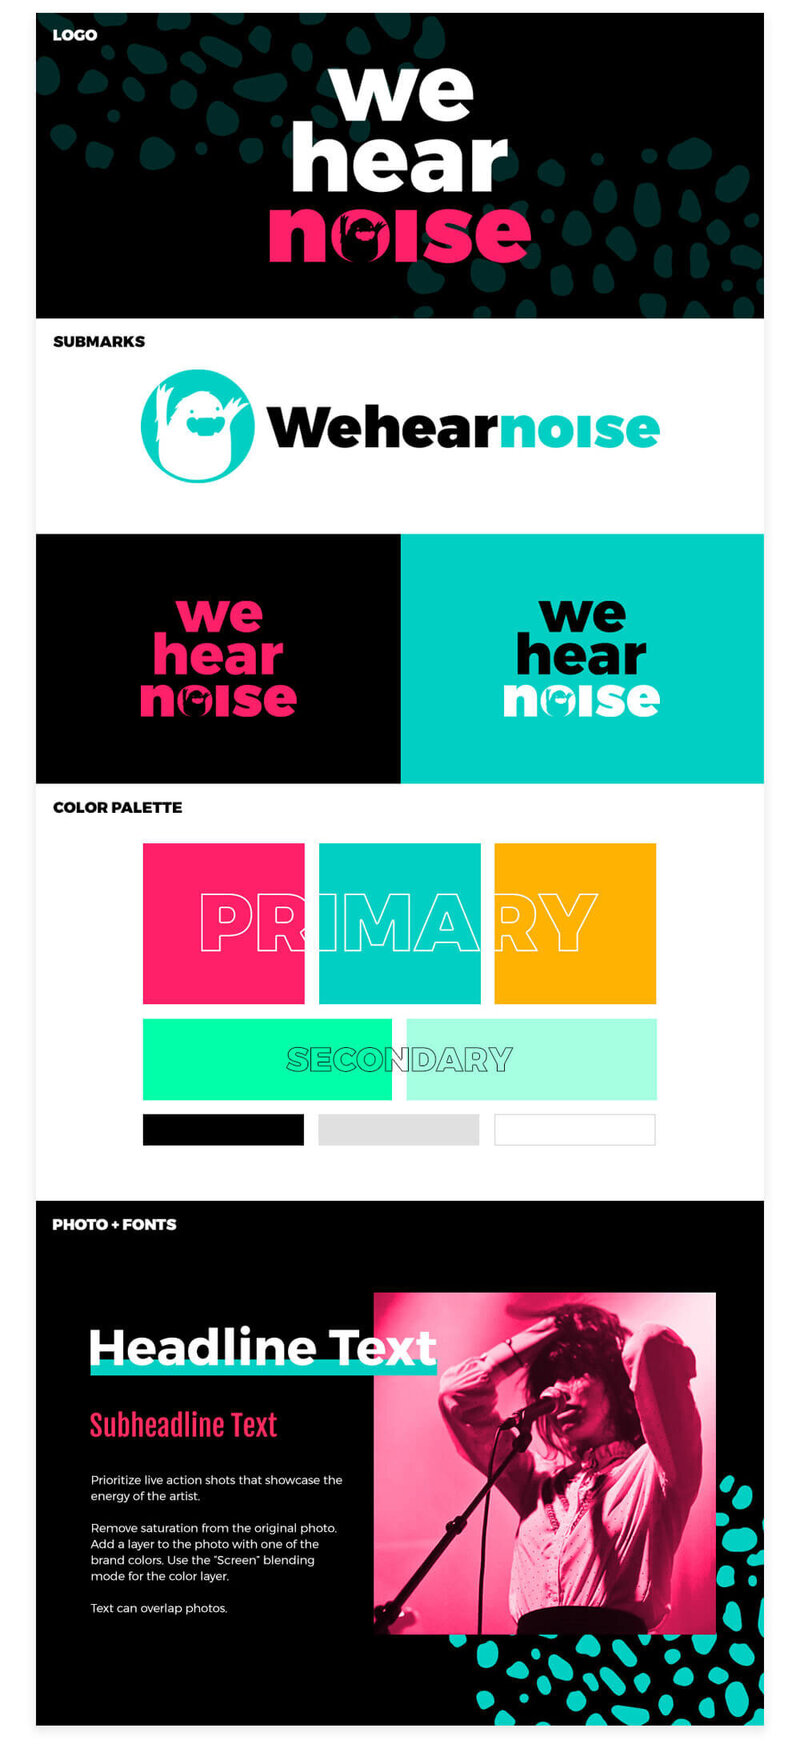 Wehearnoise Branding Identity Design - including logo design variants, color palette, and photography with fonts